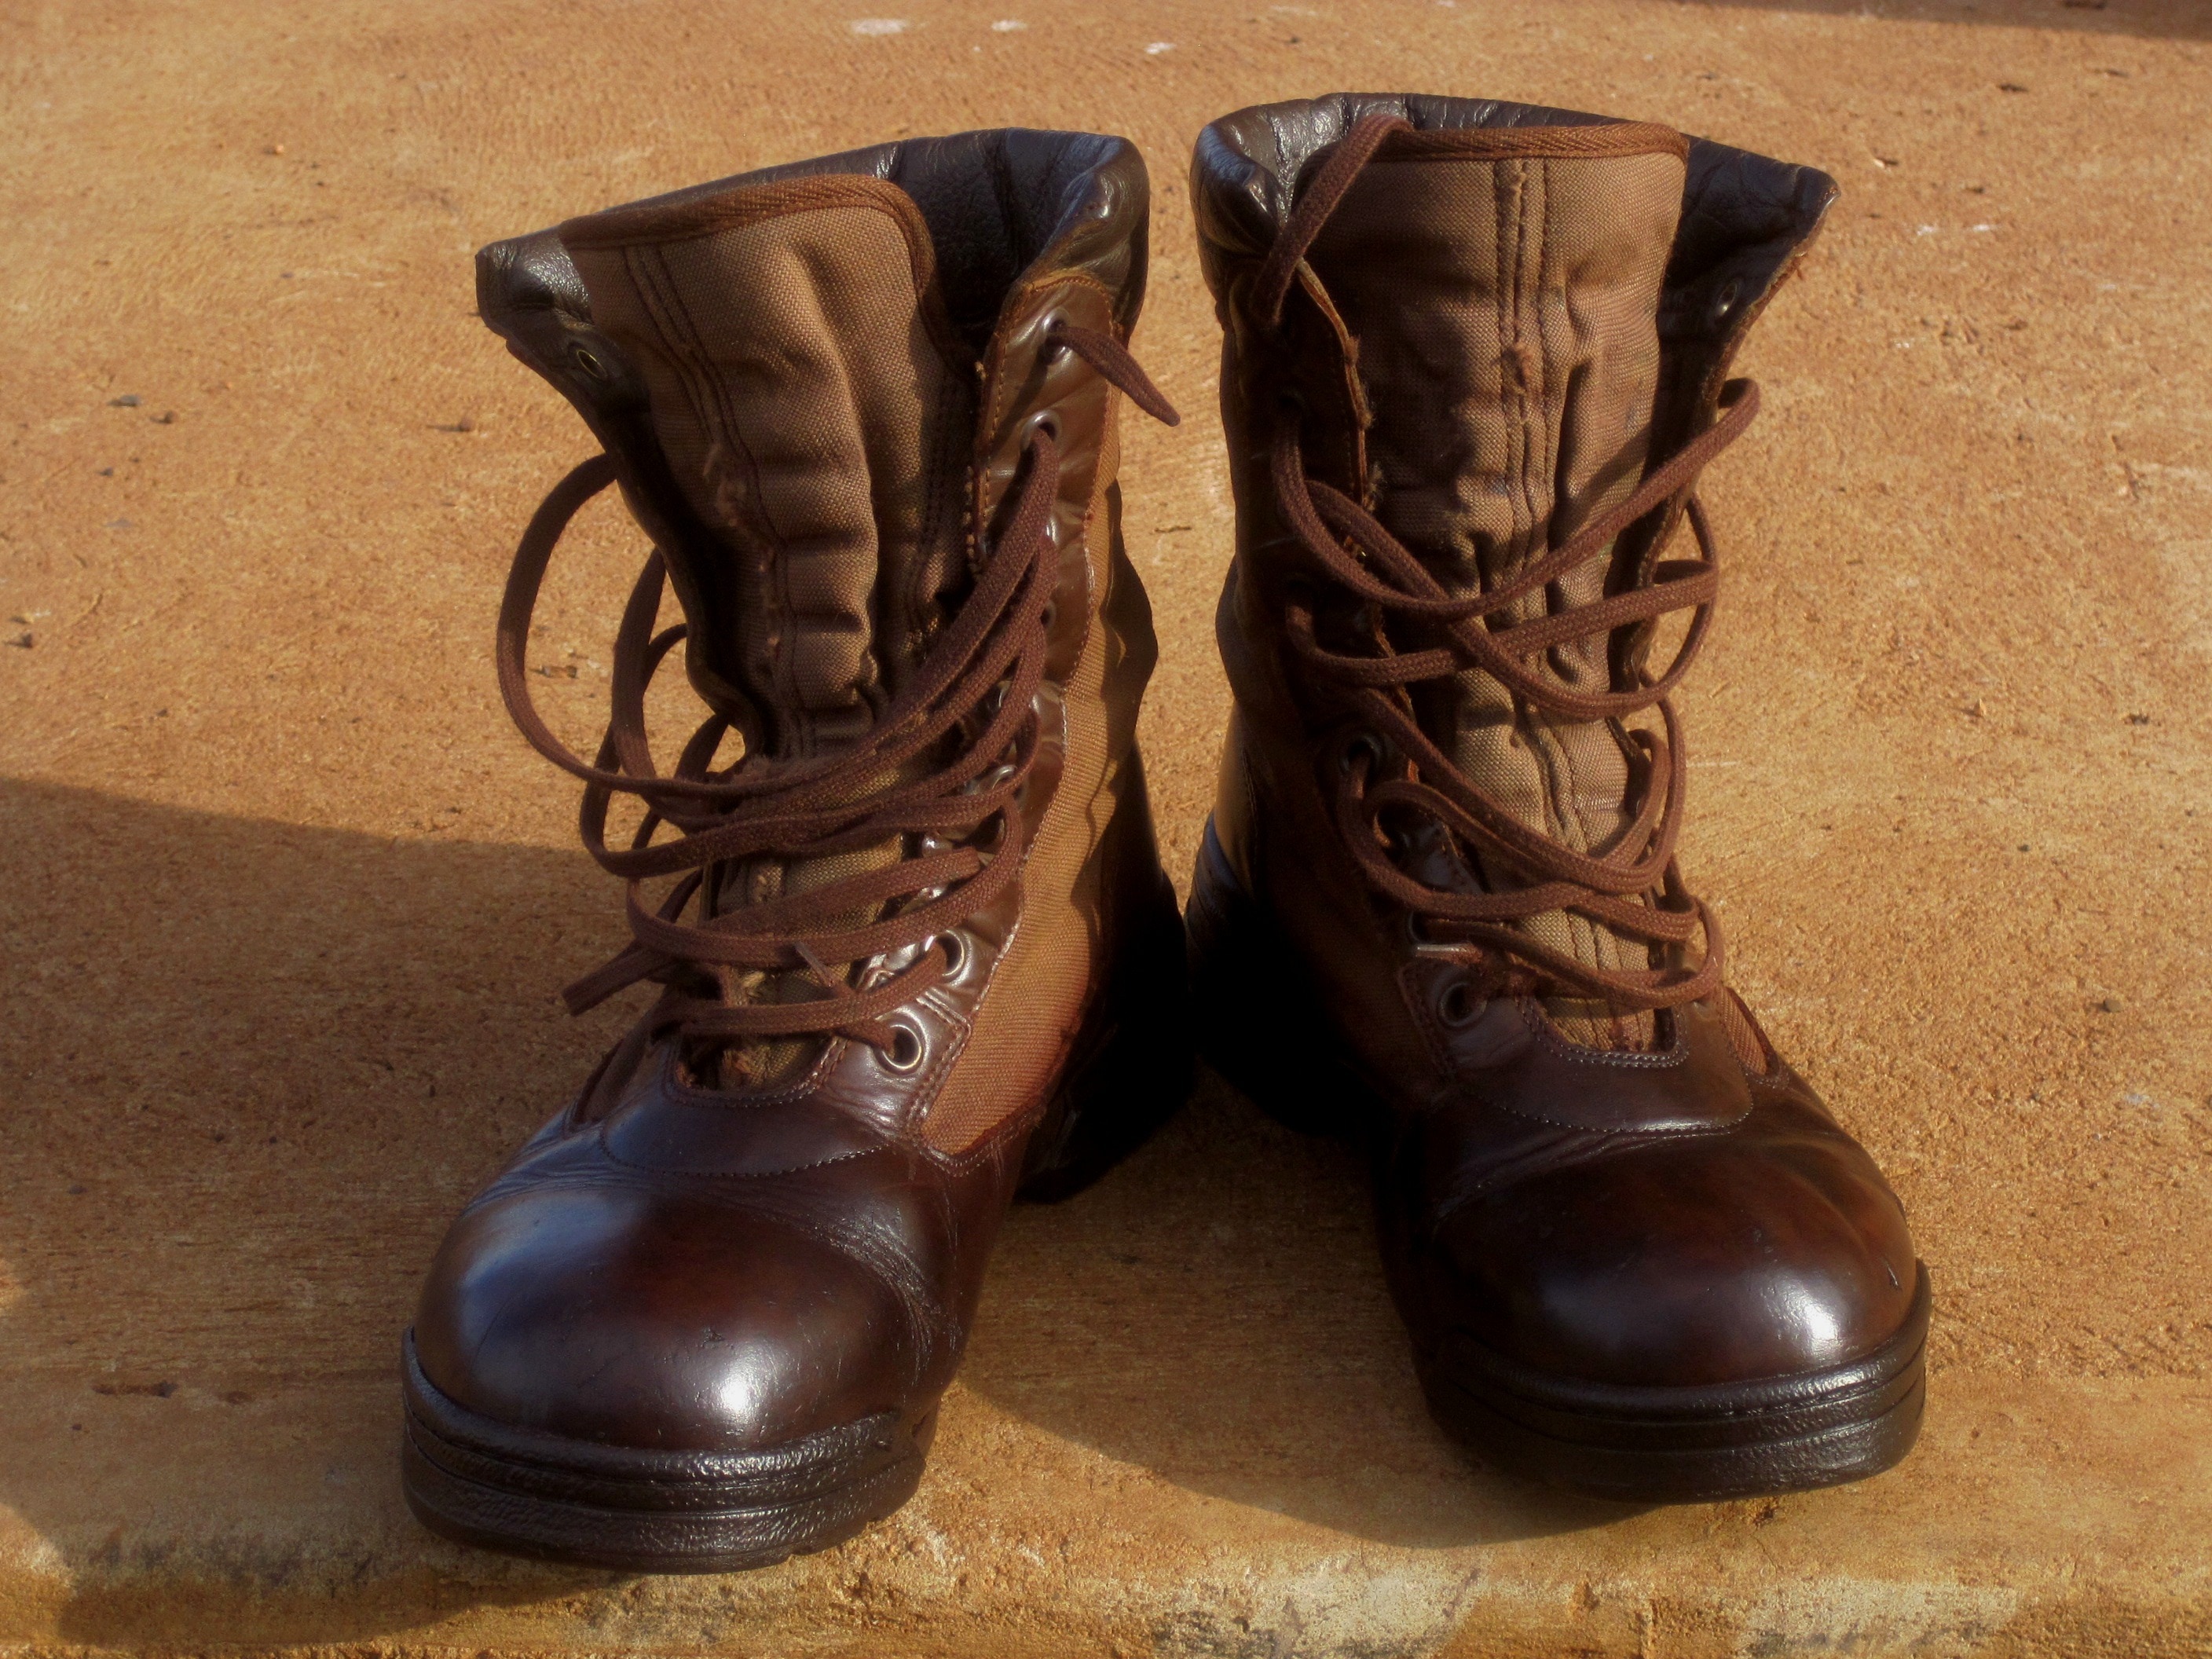 brown hiking boots